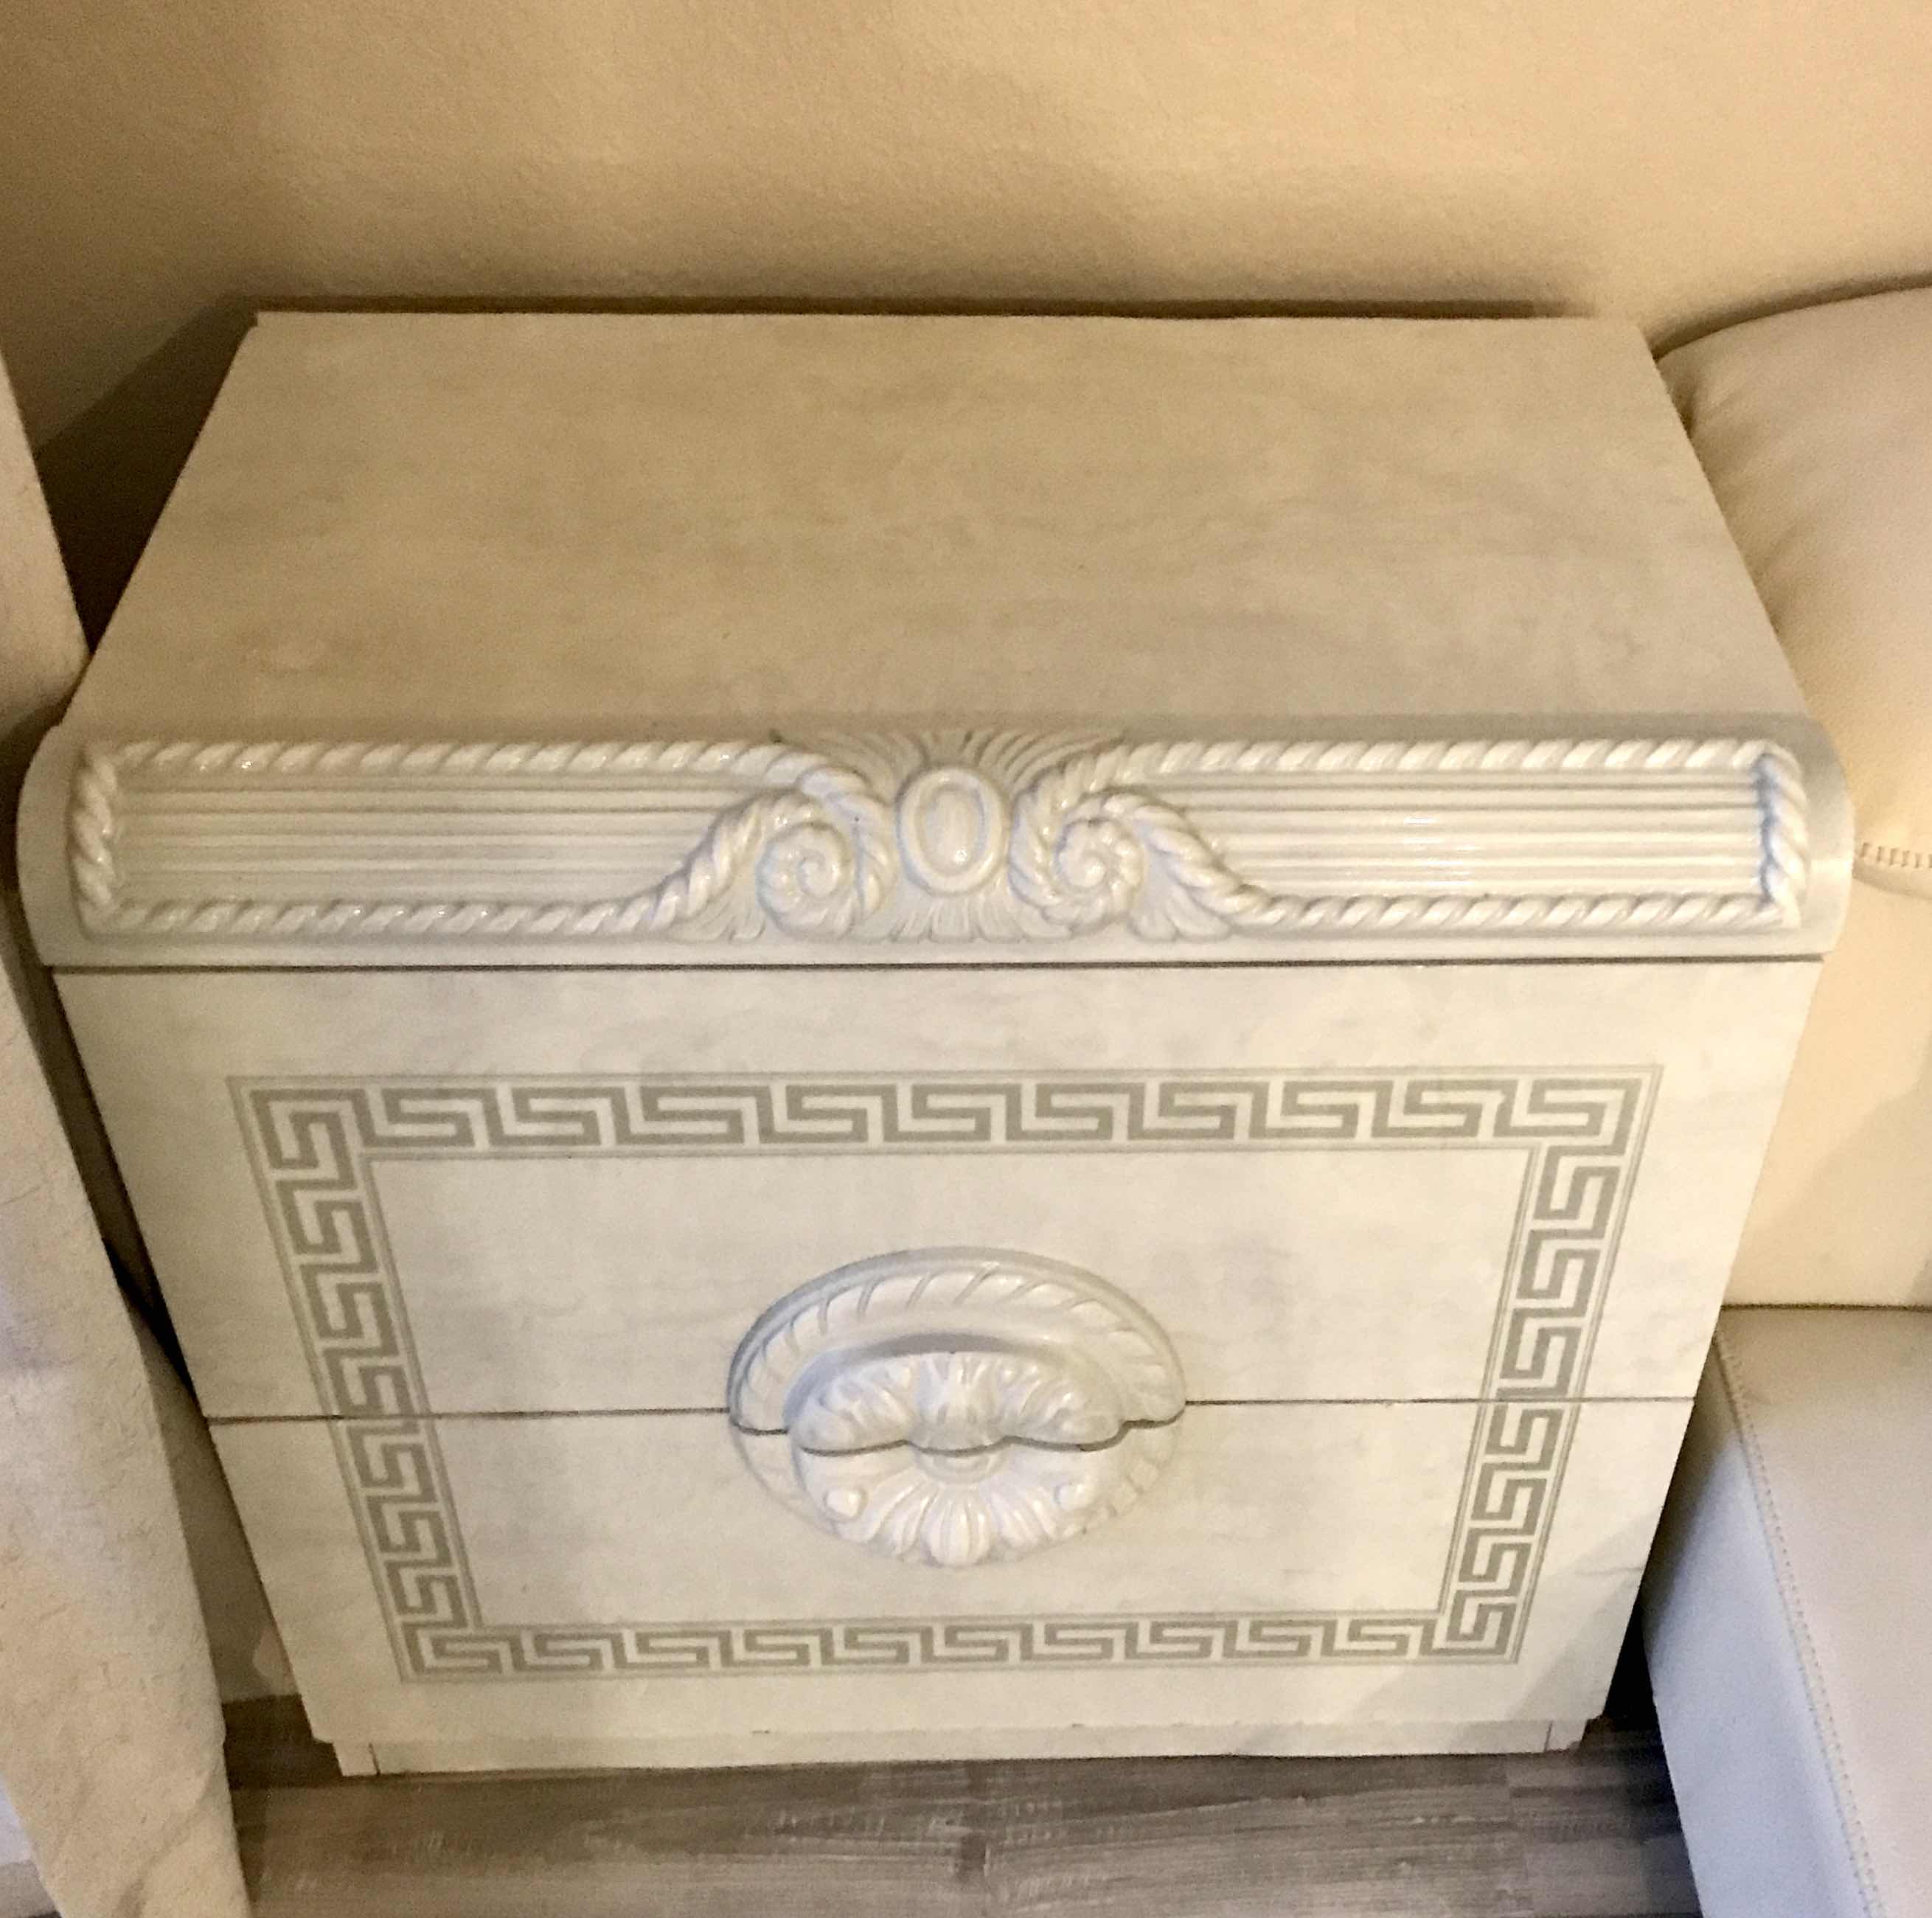 Photo 1 of ITALIAN ORNATE BEDSIDE TABLES 25.5 X 16 X 25
MORE OF THIS IN AUCTION